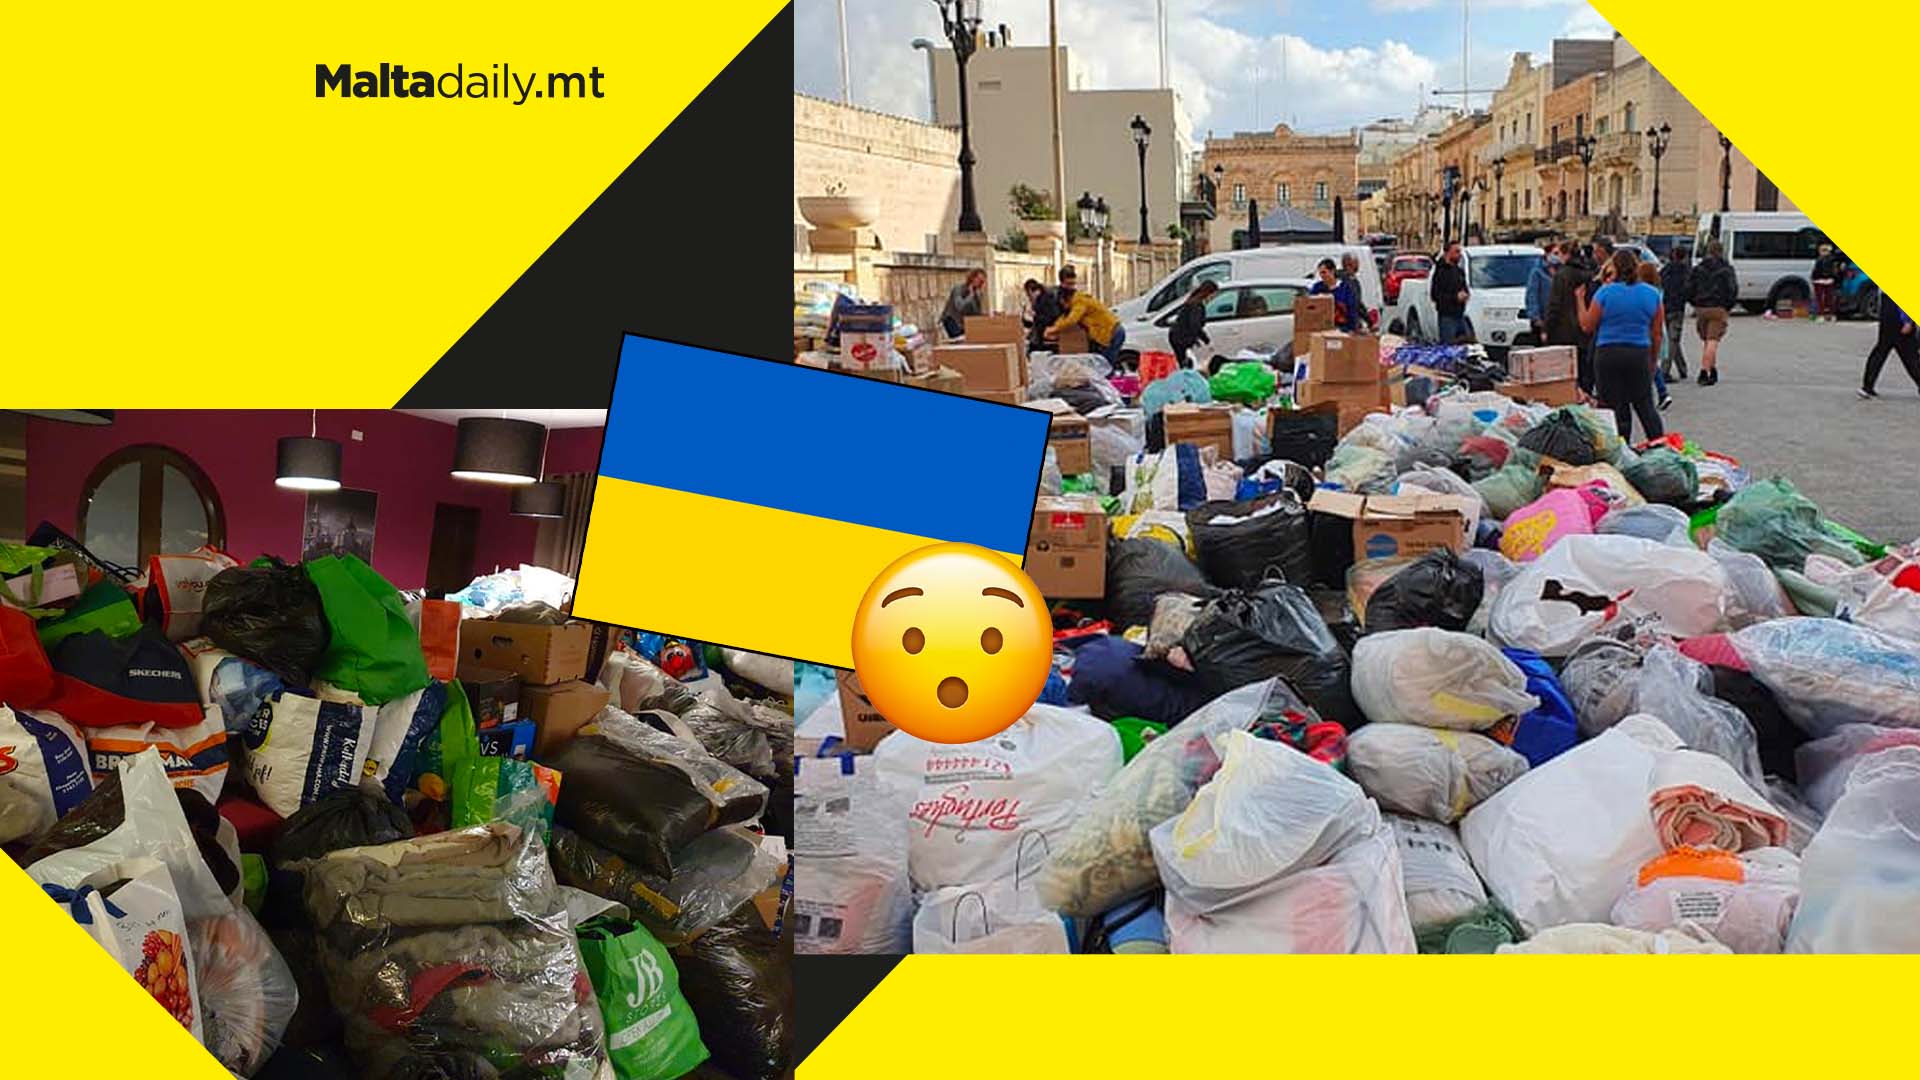 Over 14 tonnes of supplies collected in Mellieħa for Ukrainian refugees